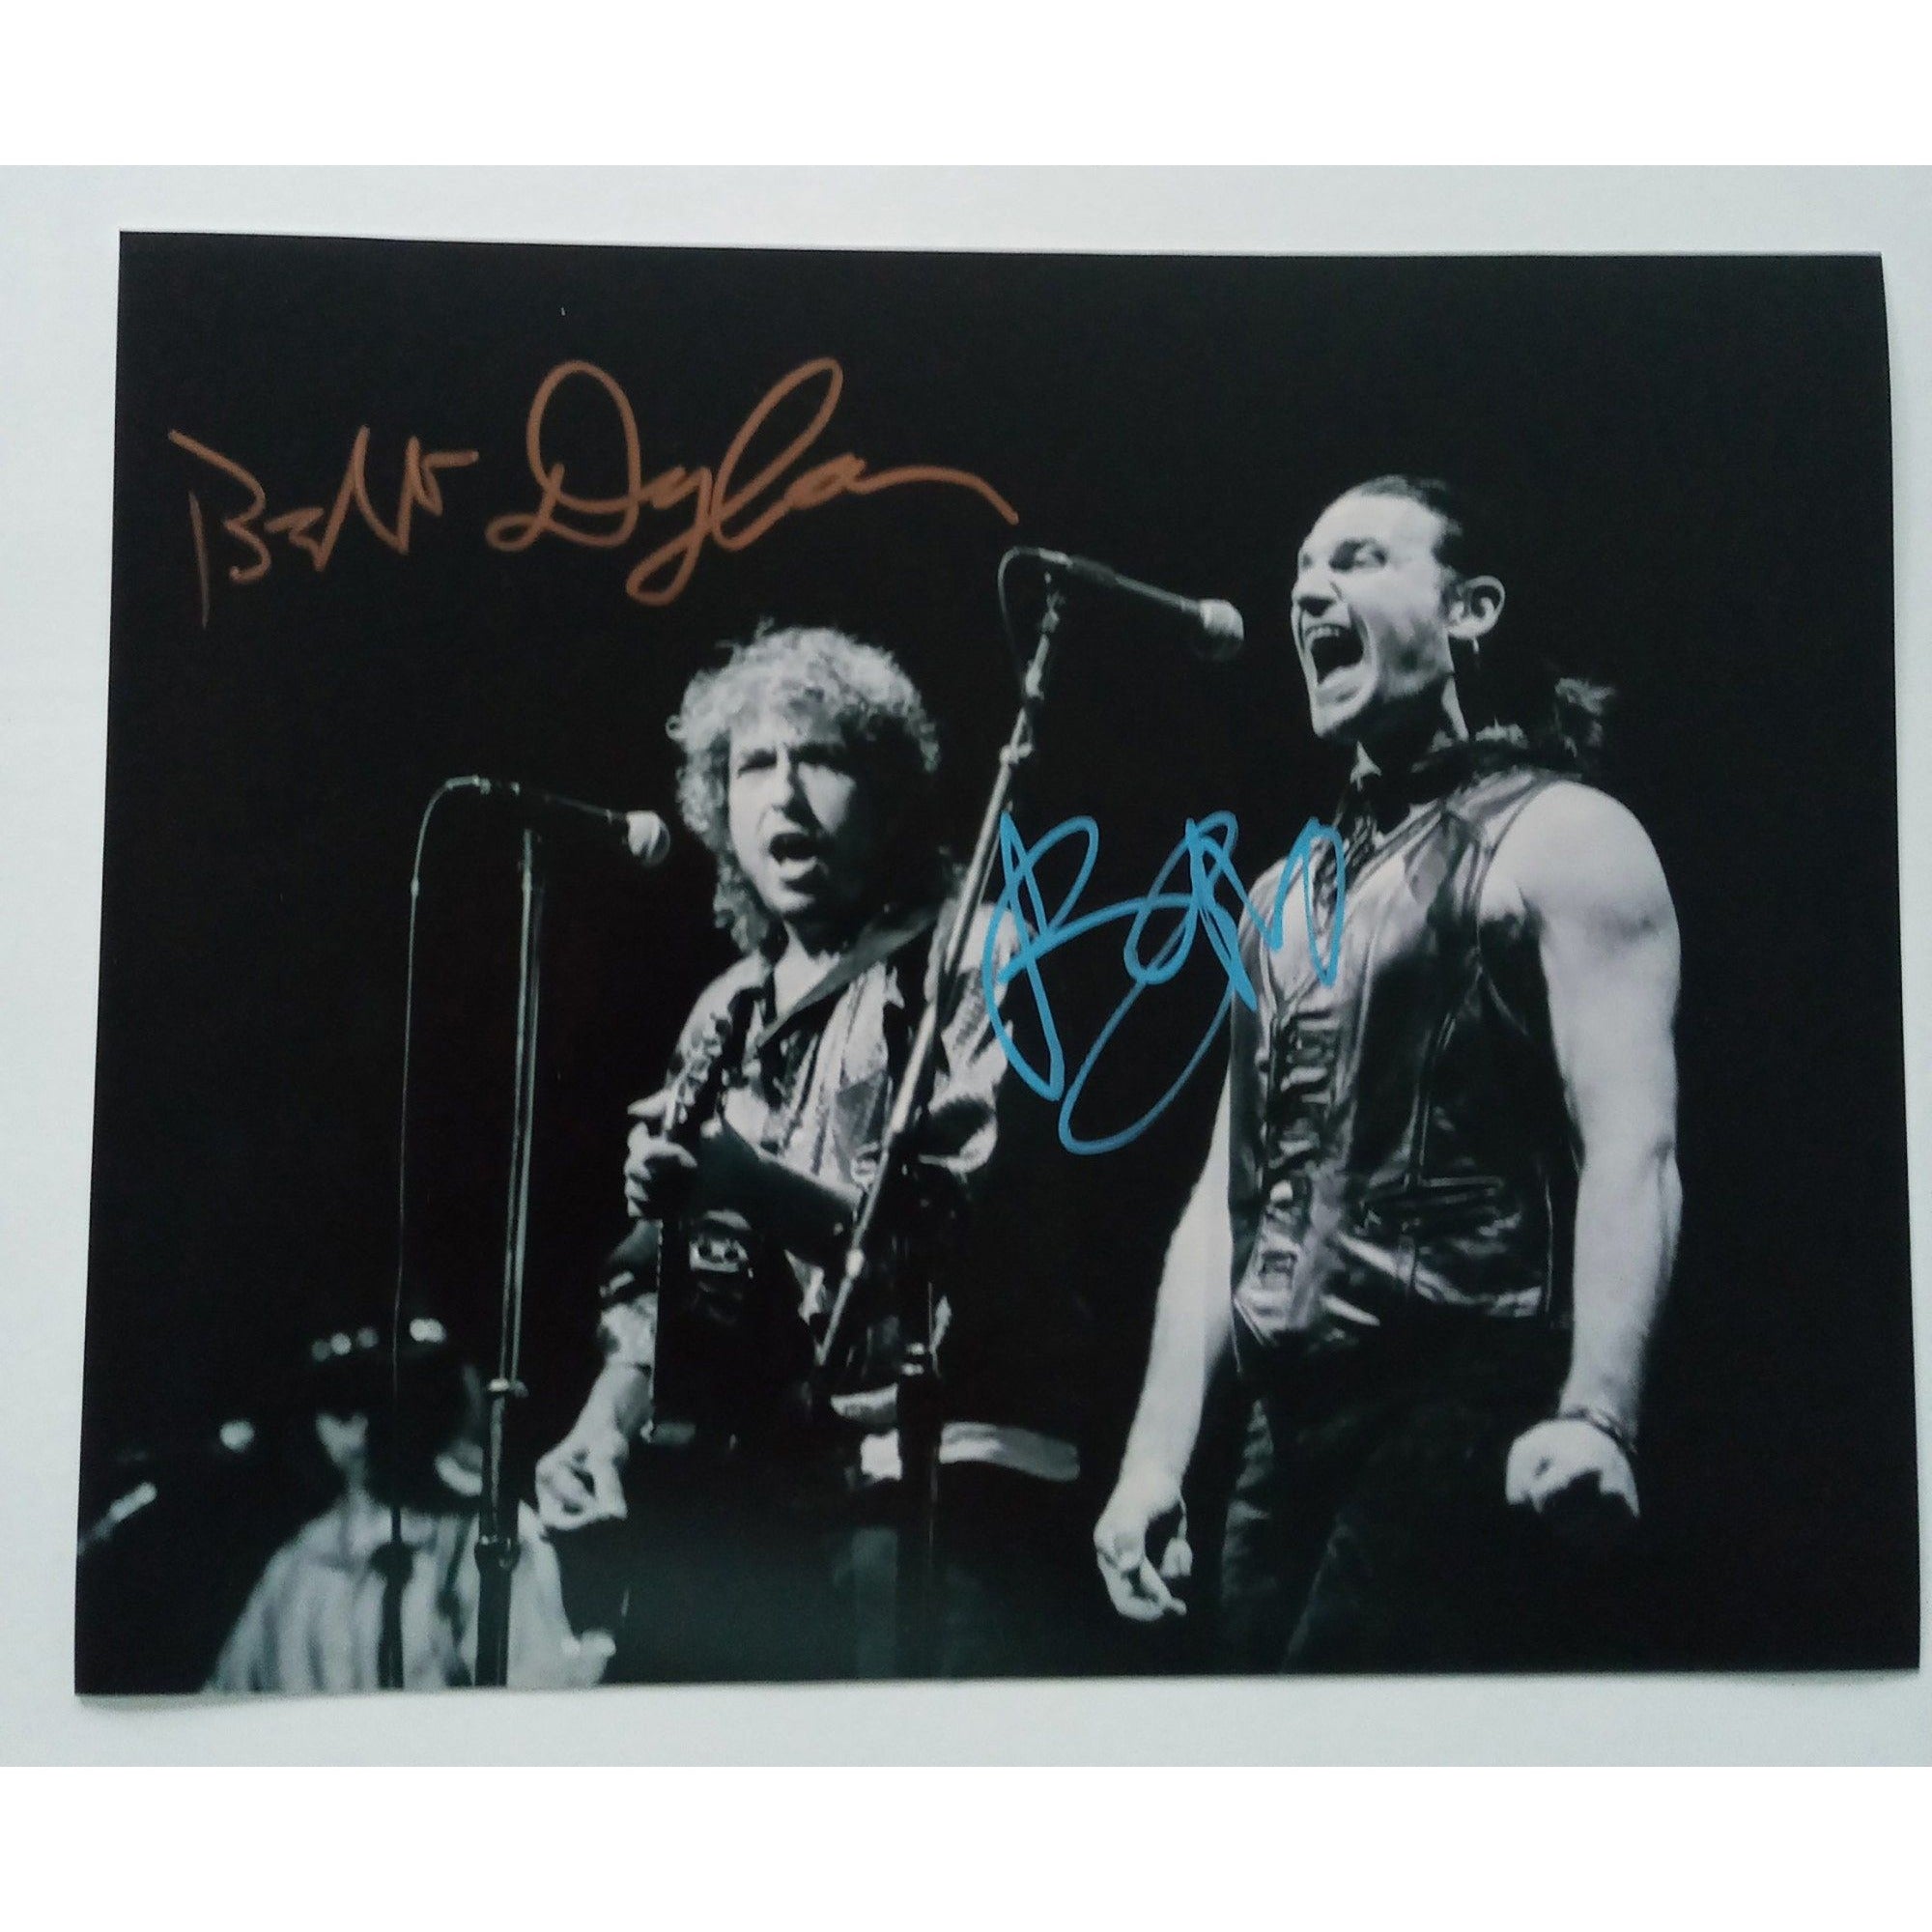 Bob Dylan and Bono Paul Hewson of U2 8 by 10 signed photo with proof